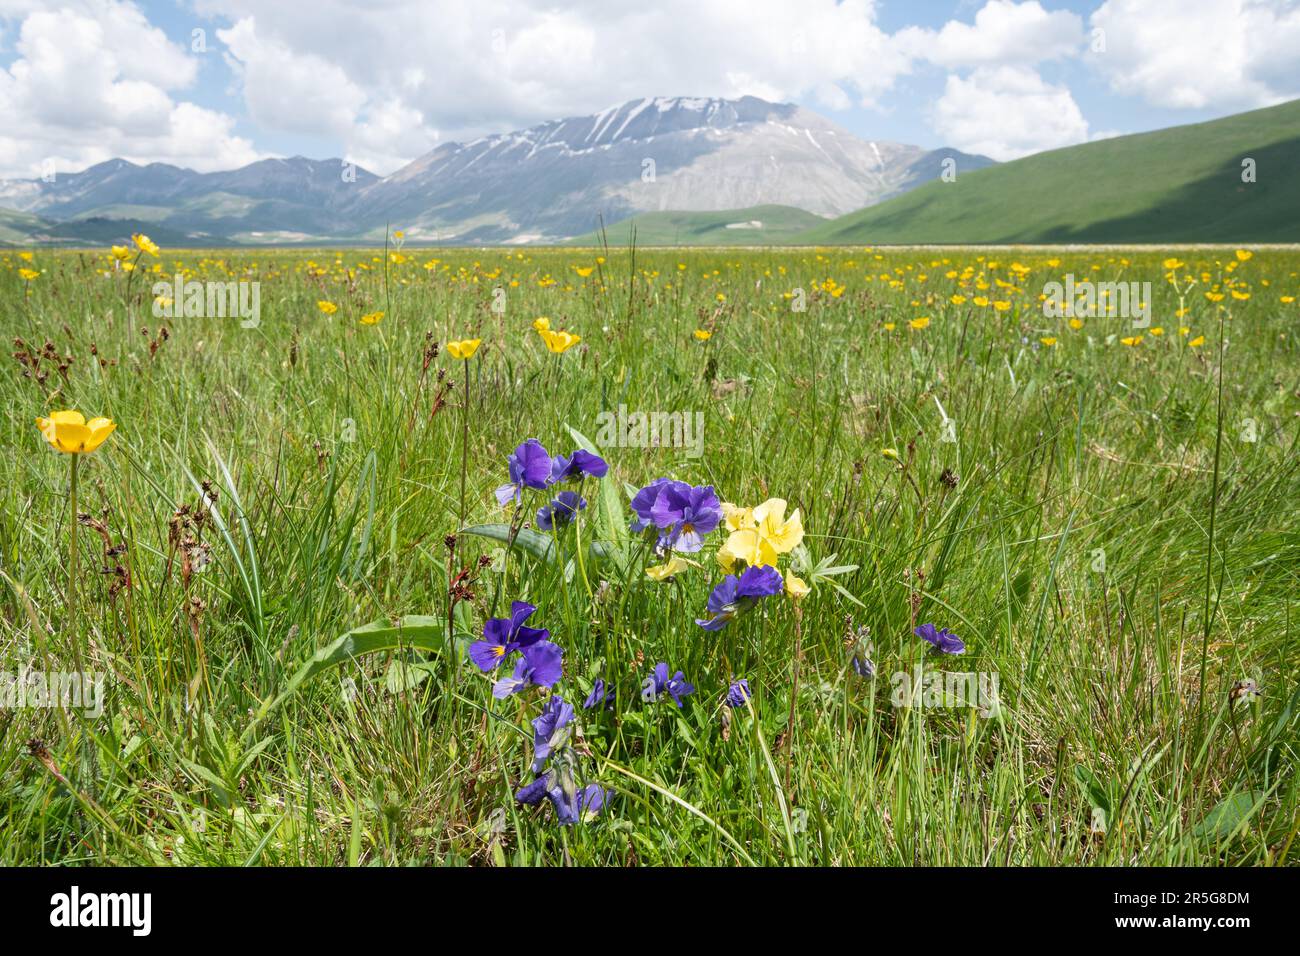 Eugenia's pansy Viola eugeniae during May on the Piano Grande plateau in Sibillini National Park surrounded by the Sibilline mountains, Umbria, Italy Stock Photo